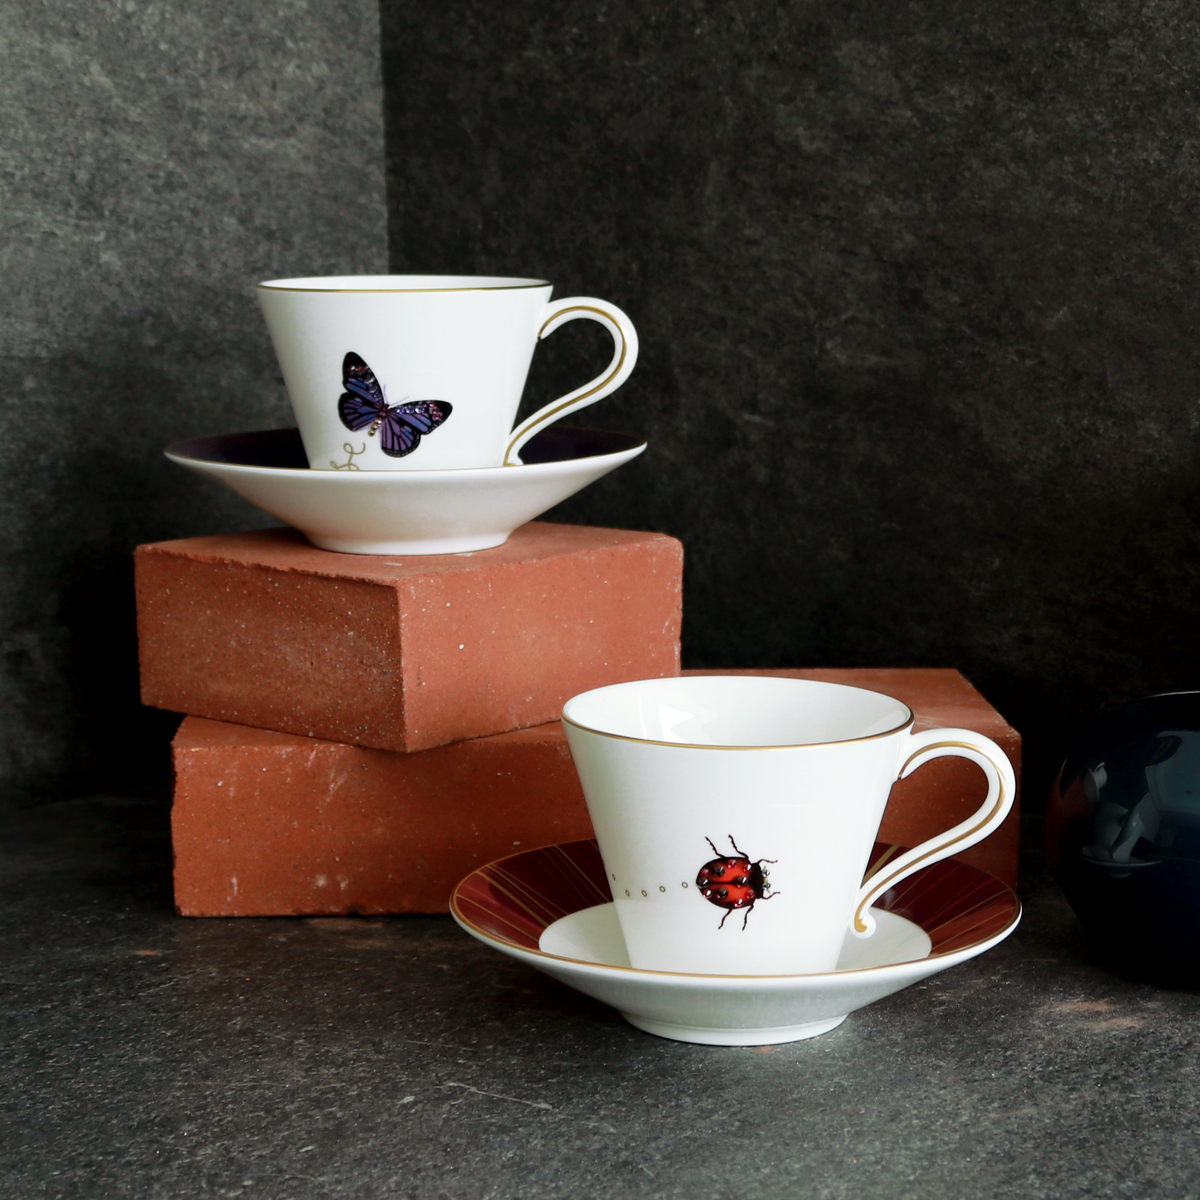 My Ladybug and My butterfly teacup and saucer